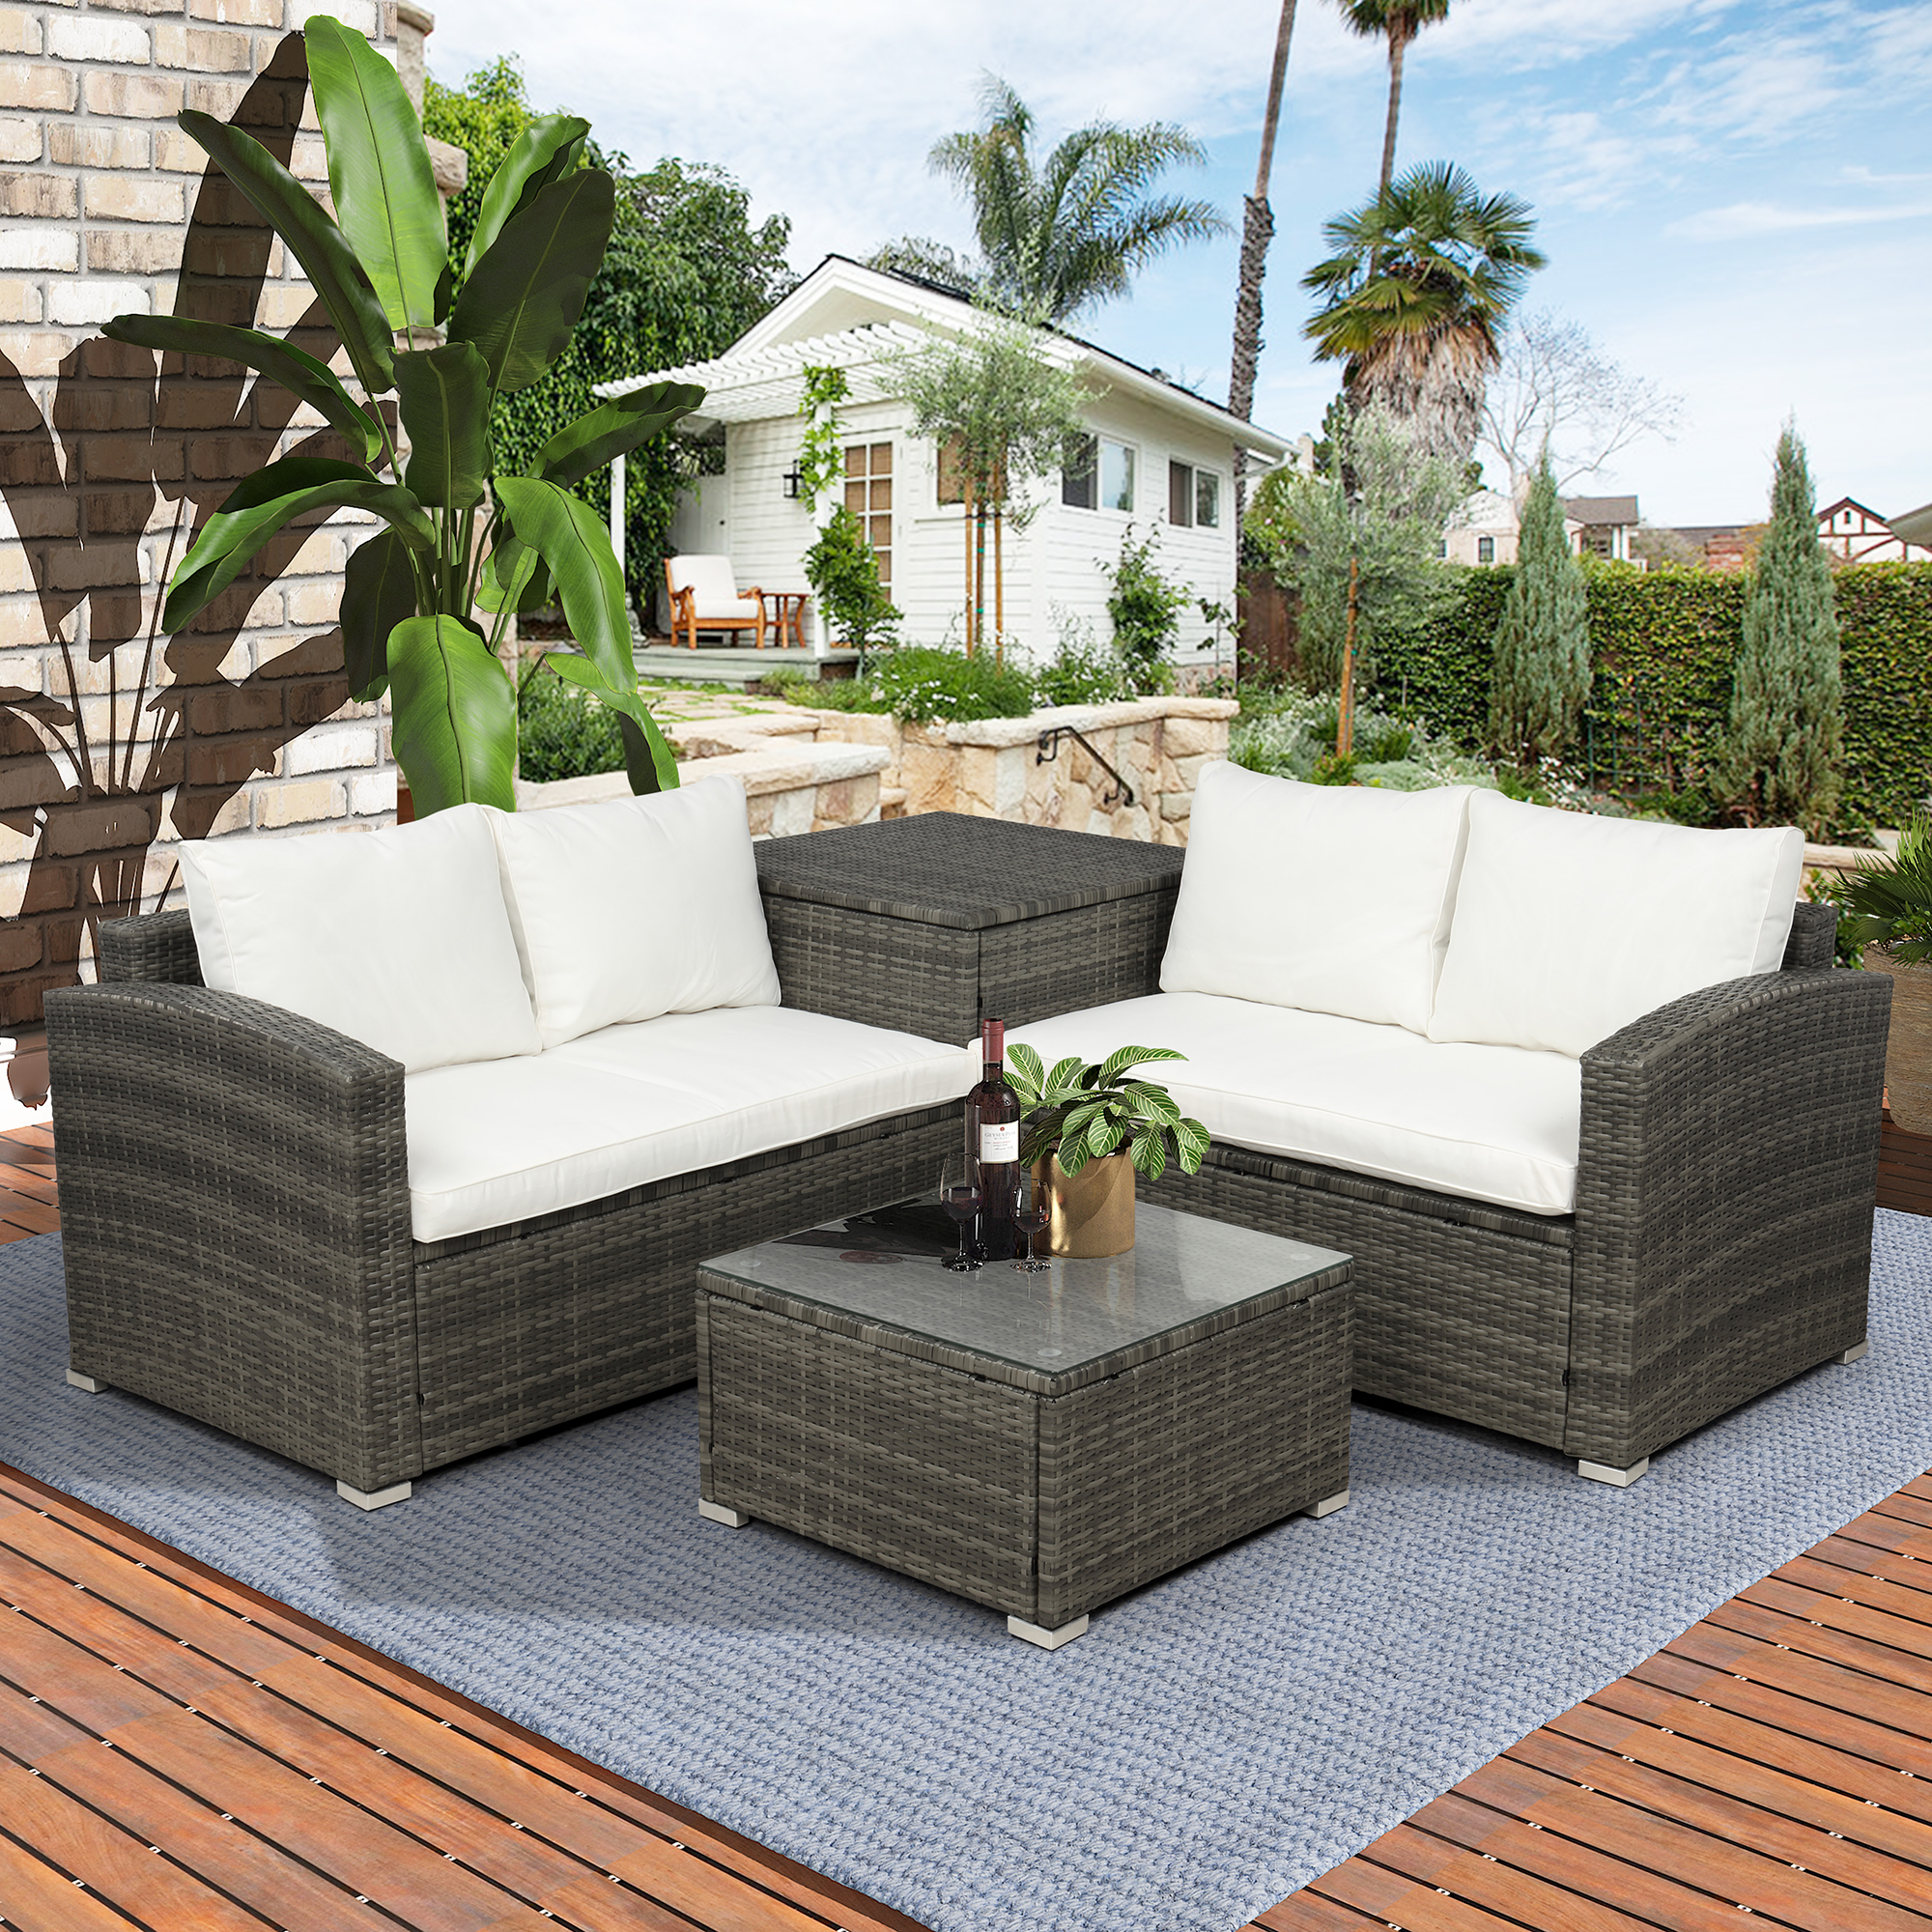 enyopro Outdoor Wicker Patio Furniture Sets, 4 Piece Outdoor Conversation Set with Storage Box and Coffee Table, Rattan Outside Furniture Set, Patio Backyard Porch Balcony Furniture Sets, JA1740 - image 1 of 9